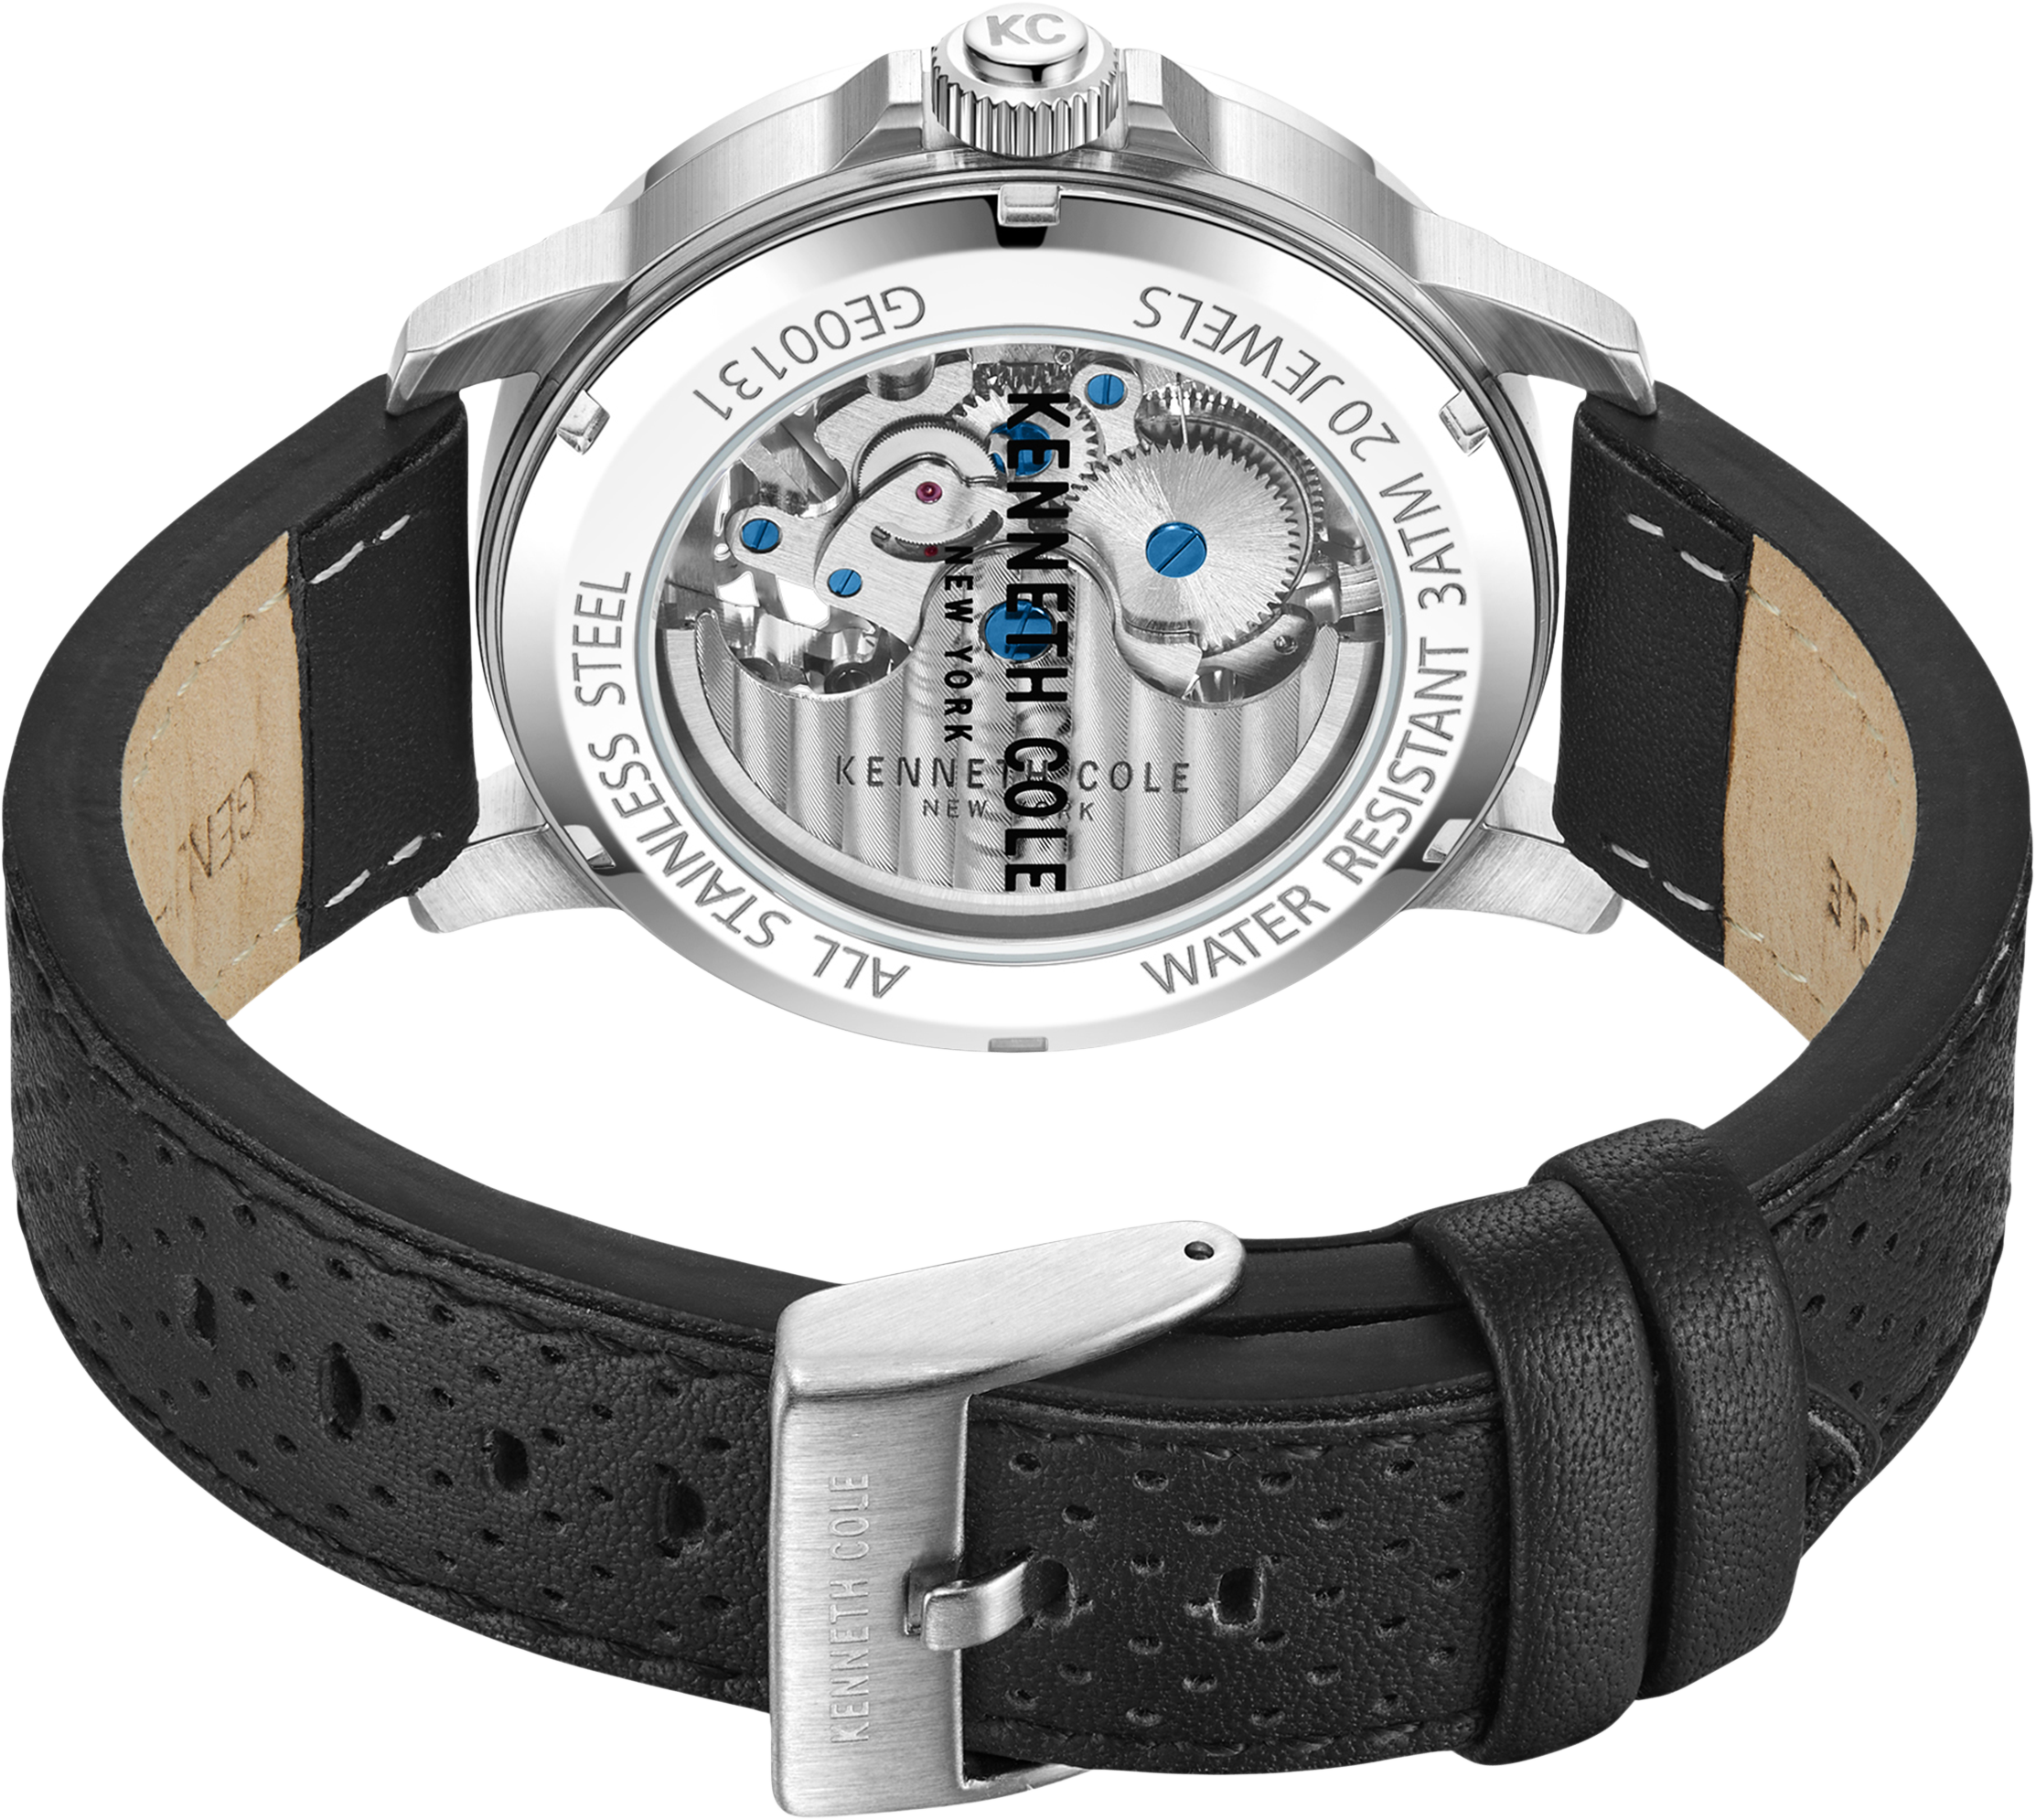 Stainless Steel With Perforated Leather Strap Watch